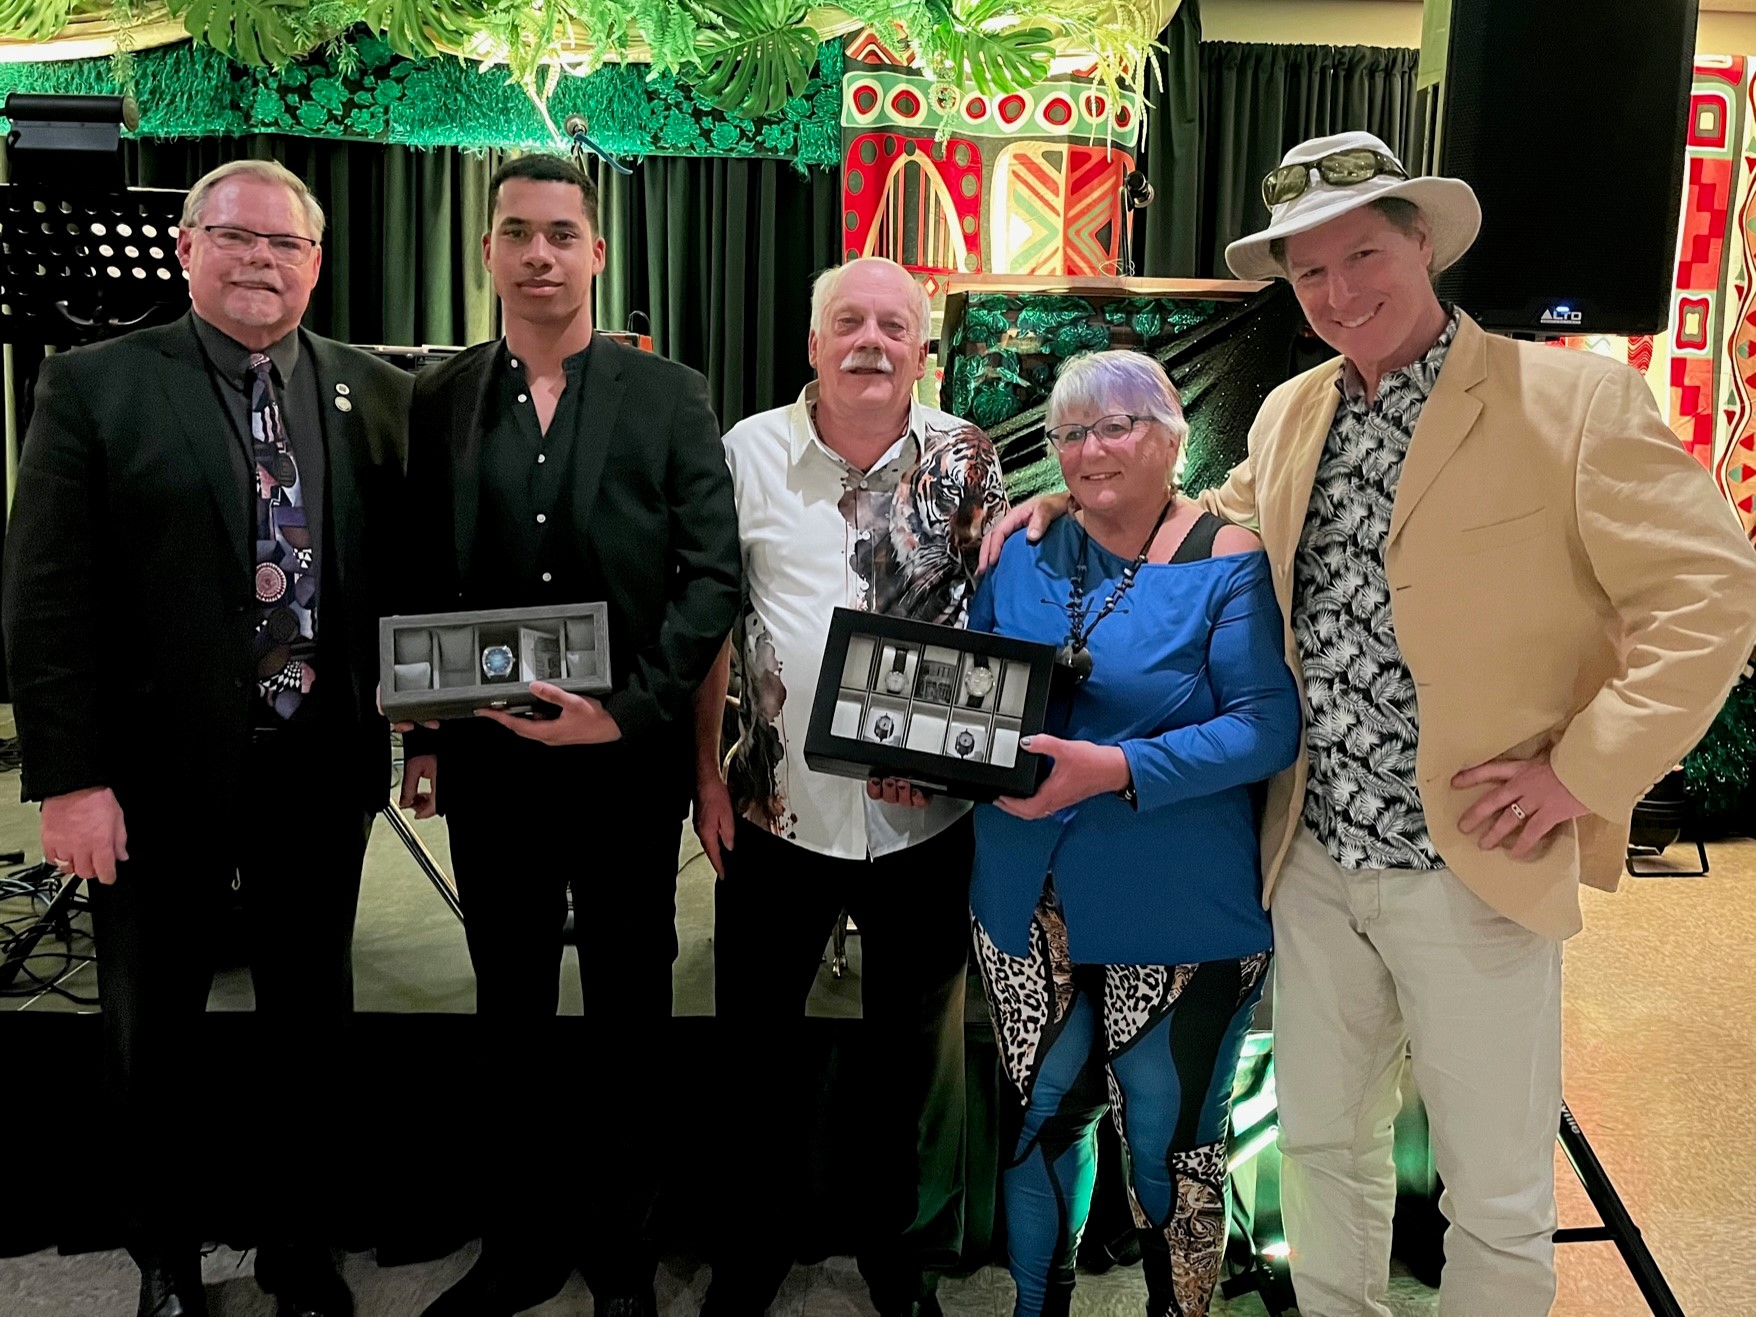 Pictures L to R:  South Stormont Mayor Bryan McGillis, 2023 Youth Volunteer Appreciation Recipient Treyson Garner, Co-Recipients of the 2023 Fran Laflamme Volunteers of the Year Award Richard Waldroff and Gloria Waldroff, and Corporate Sponsor of the event Andre Pommier of Pommier Jewelers. 